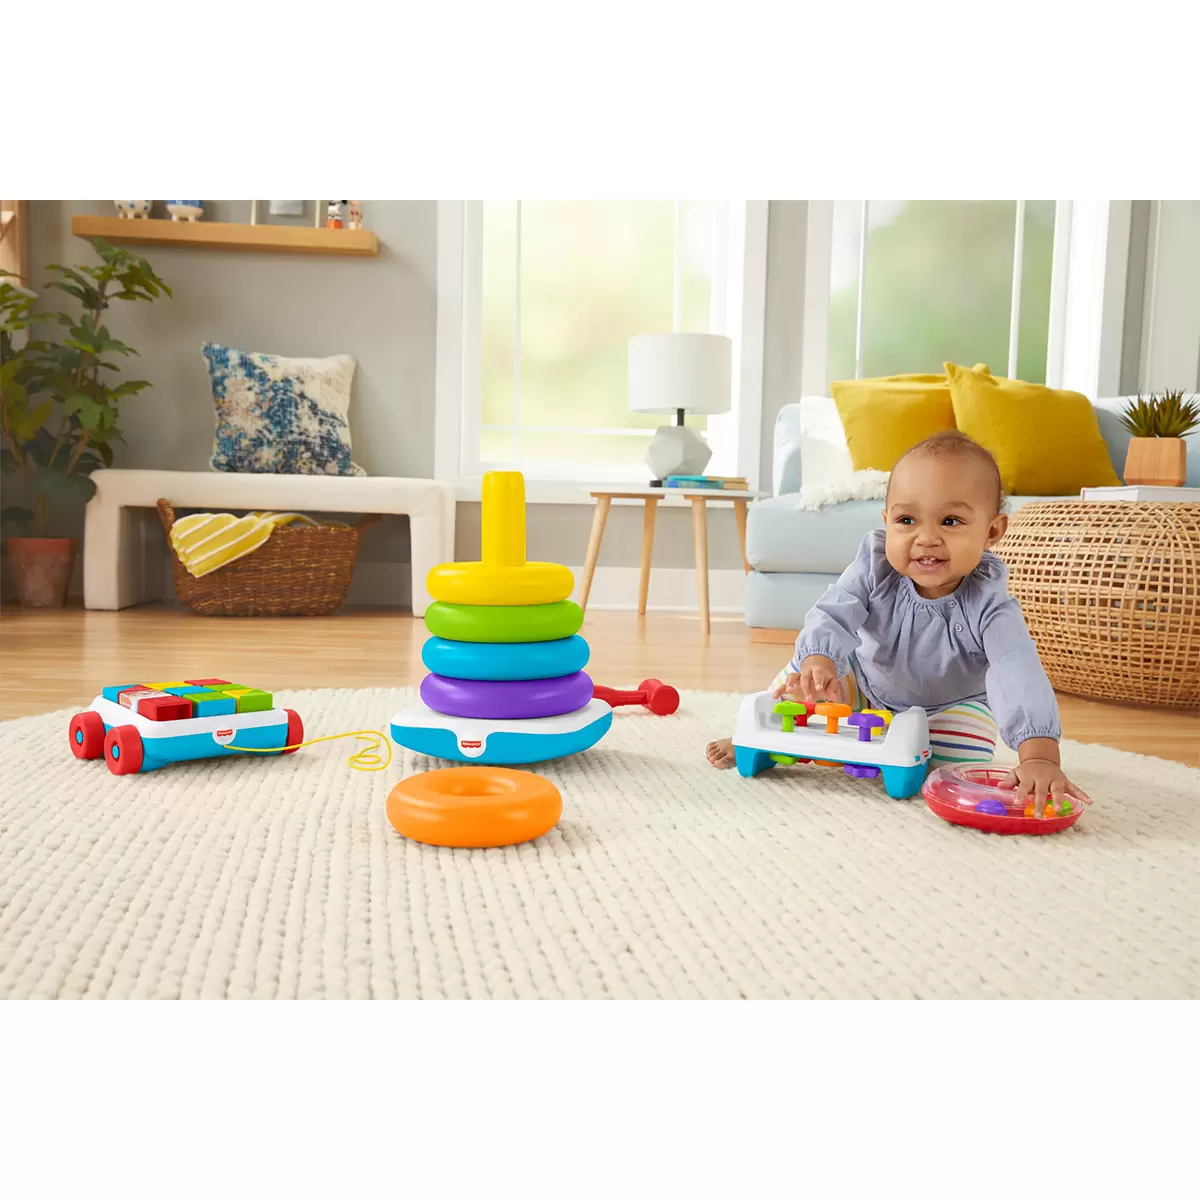 Buy Fisher Price Big Fun Toy Lifestyle3 Image at Costco.co.uk